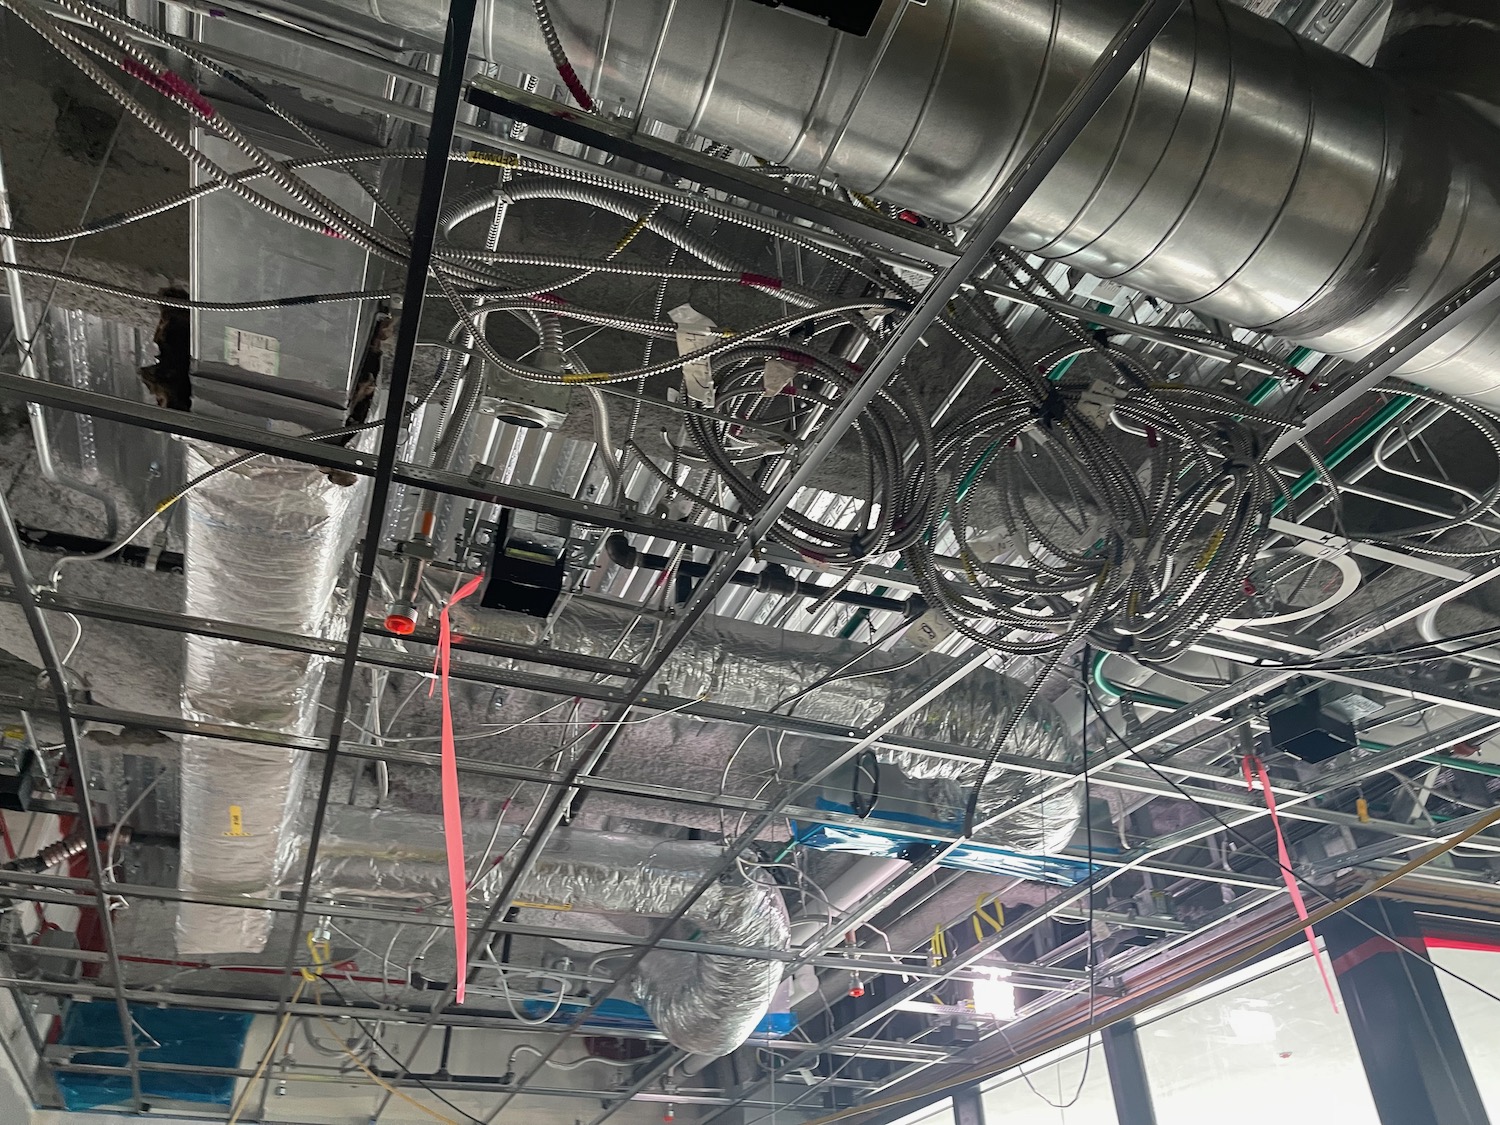 a ceiling with pipes and wires